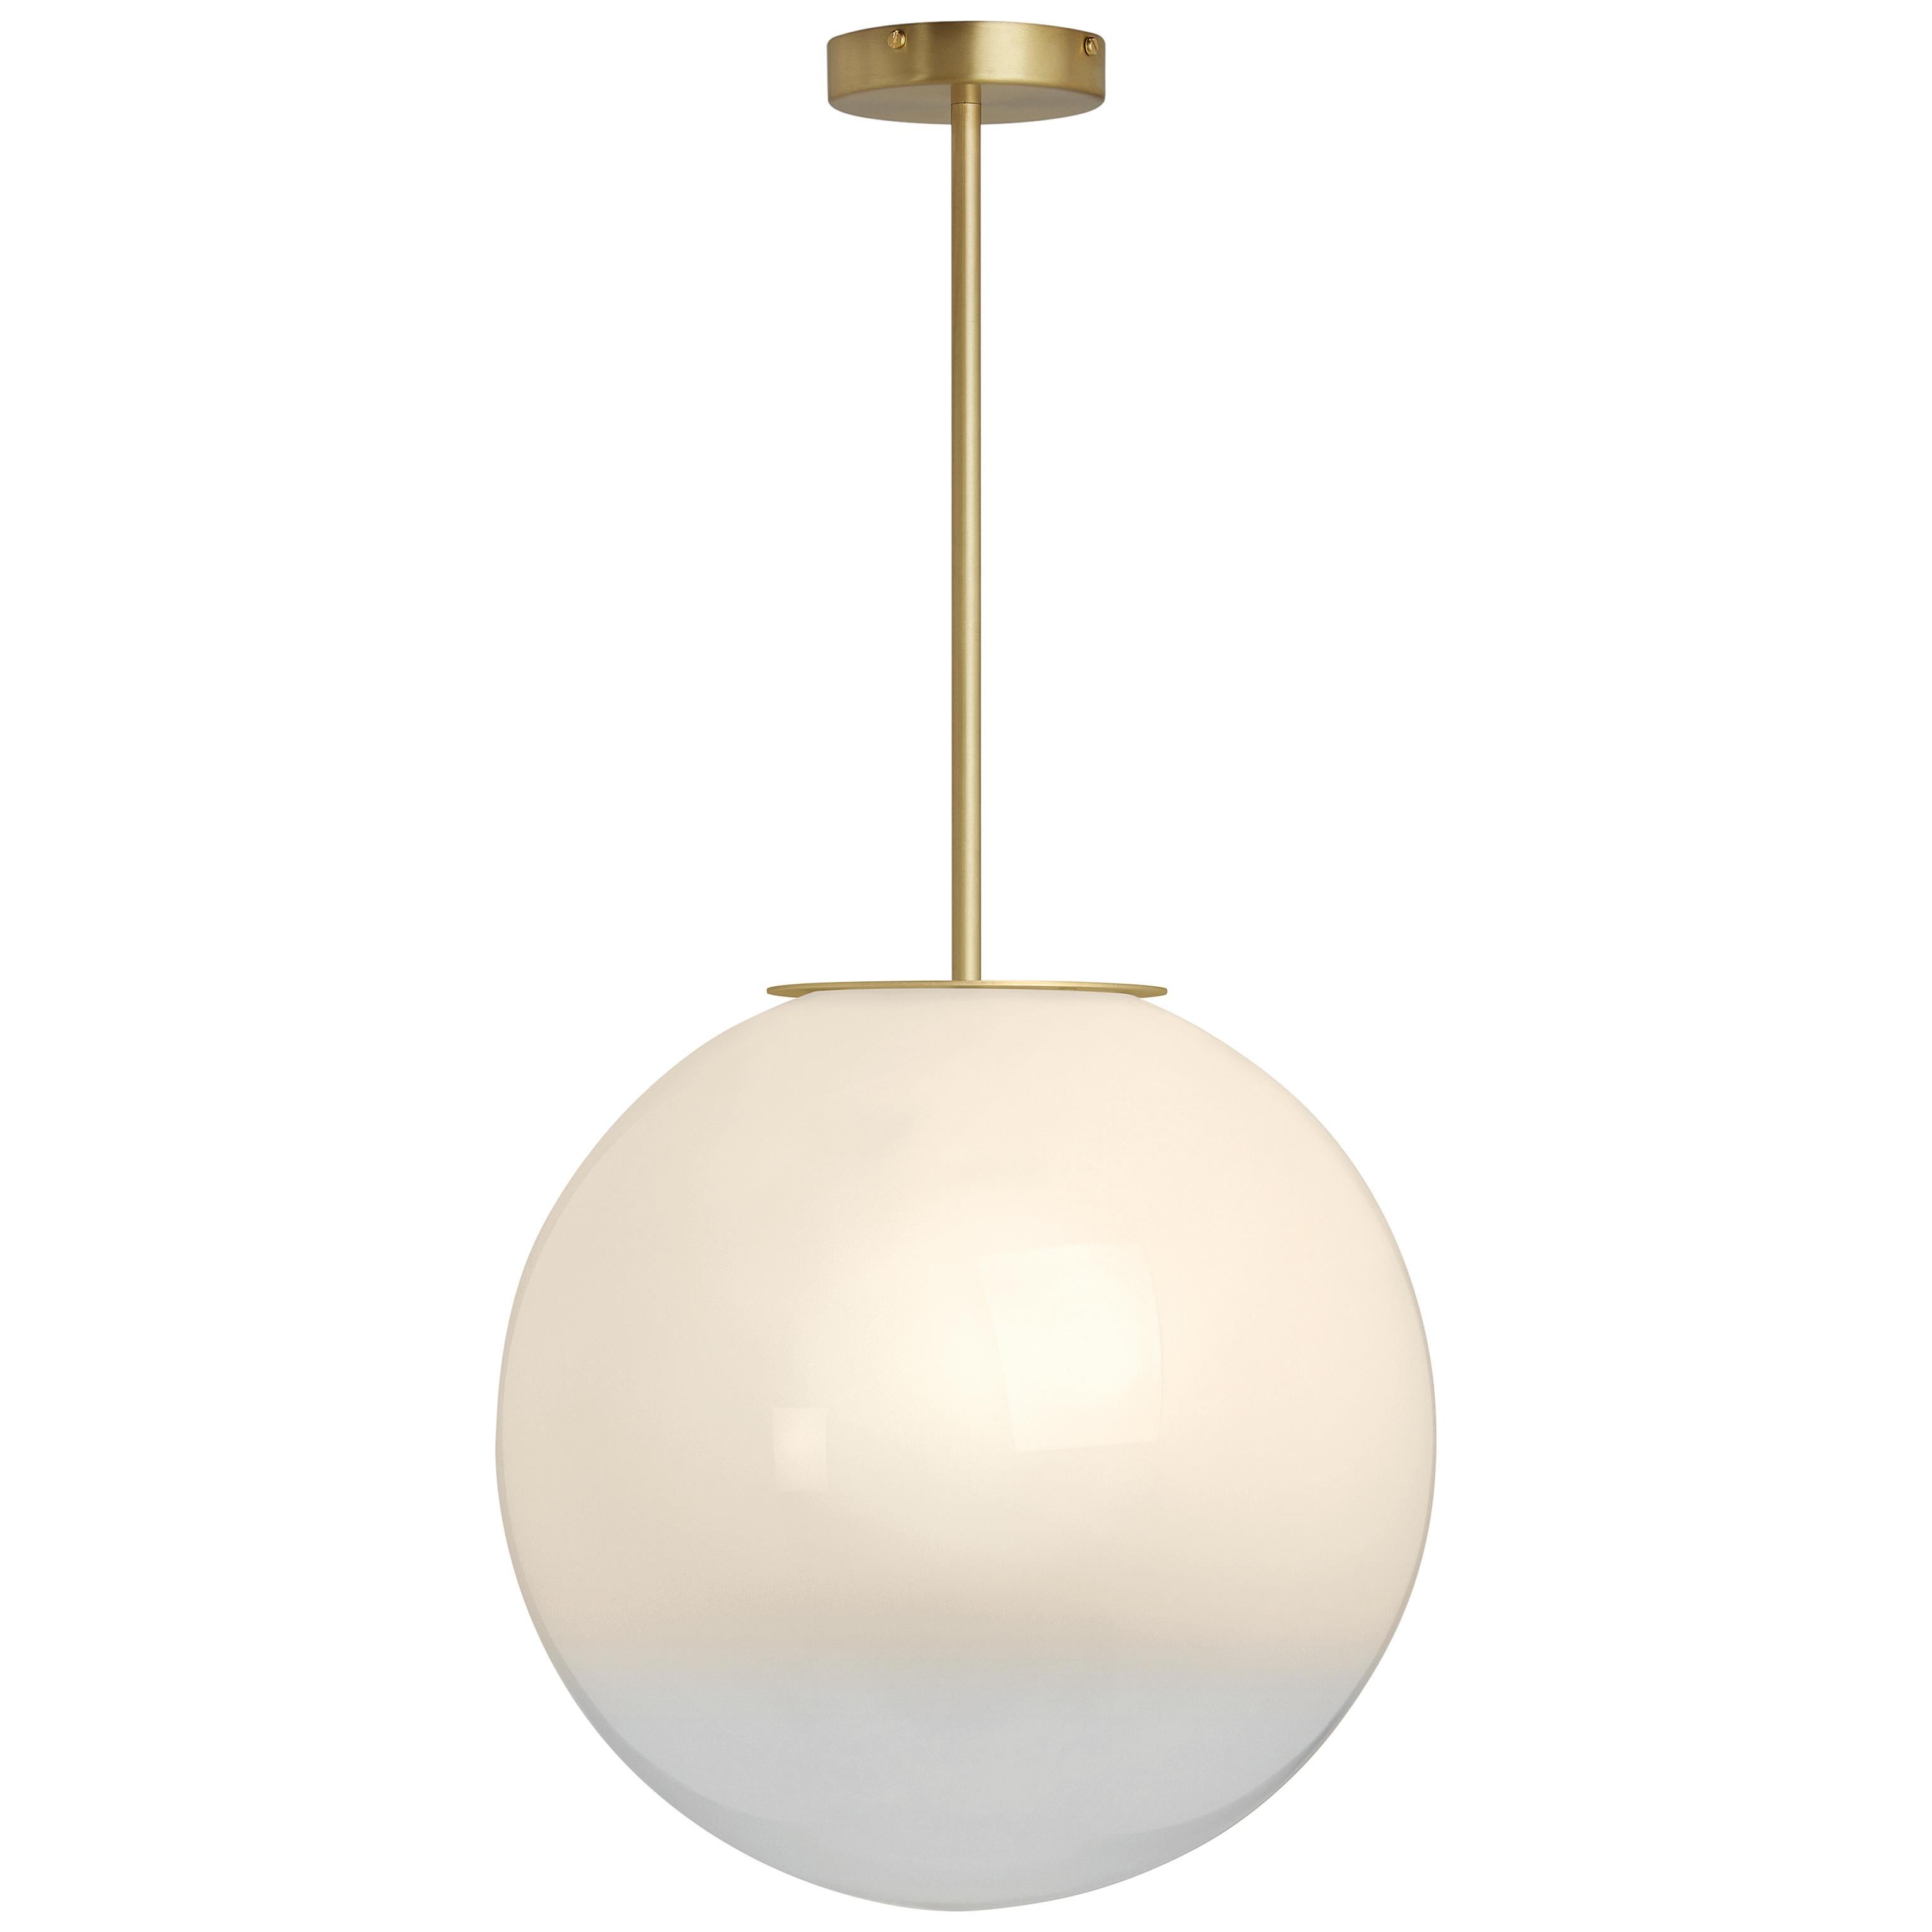 Skye medium pendant by CTO Lighting
Materials: satin brass with sfumato glass shade
Also available in dark bronze with sfumato glass shade
Dimensions: H 39 x W 40 cm 

All our lamps can be wired according to each country. If sold to the USA it